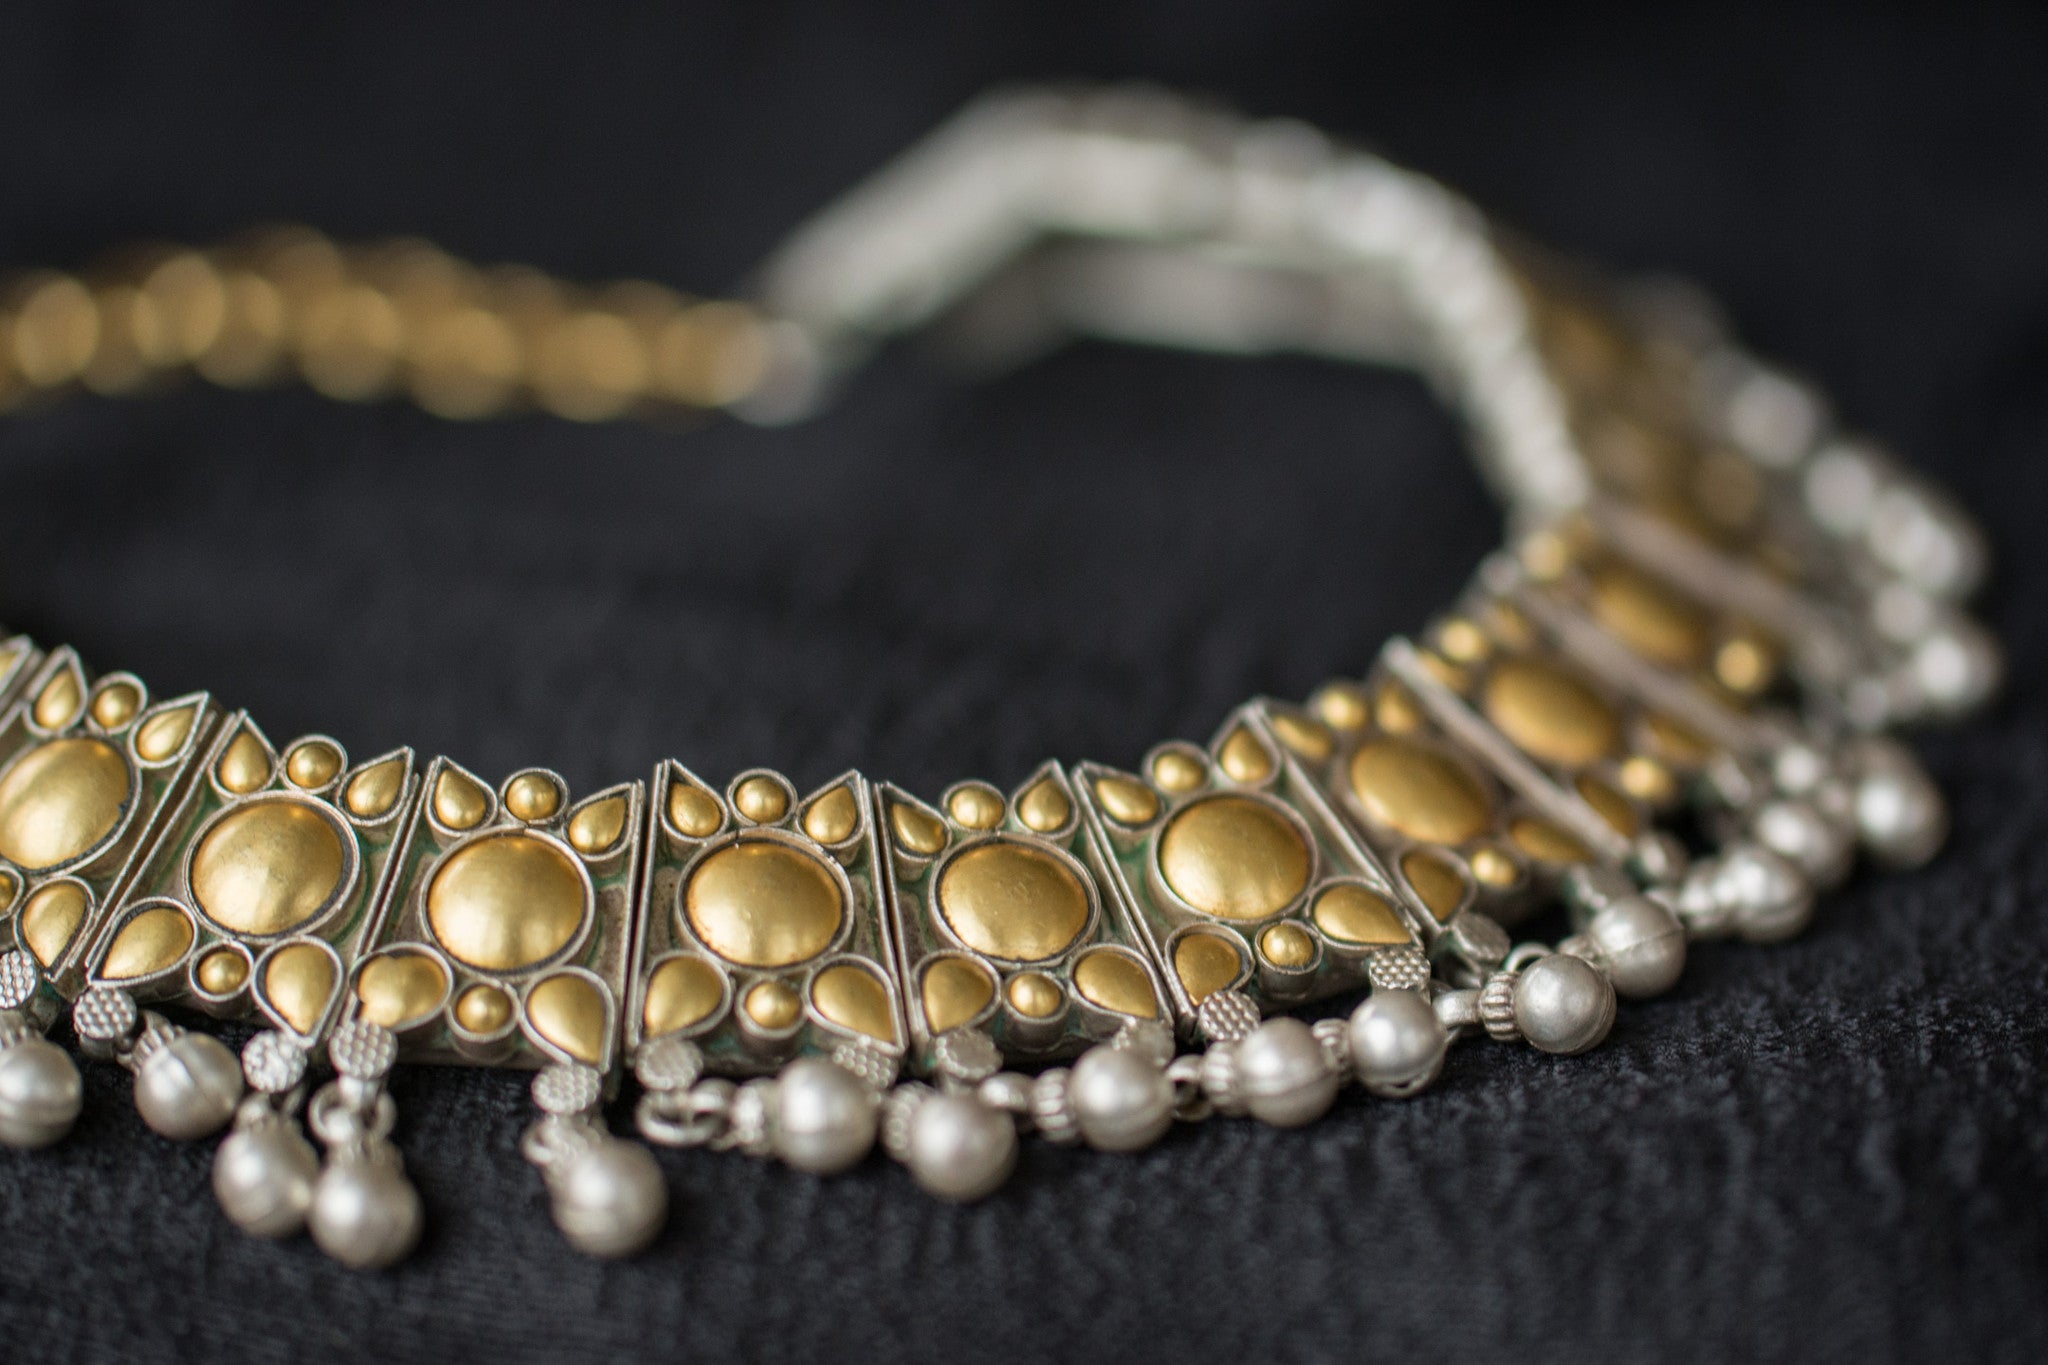 Indian Silver gold plated Amrapali Beaded fashion necklace. Traditional look neckpiece good in all events.-close up design